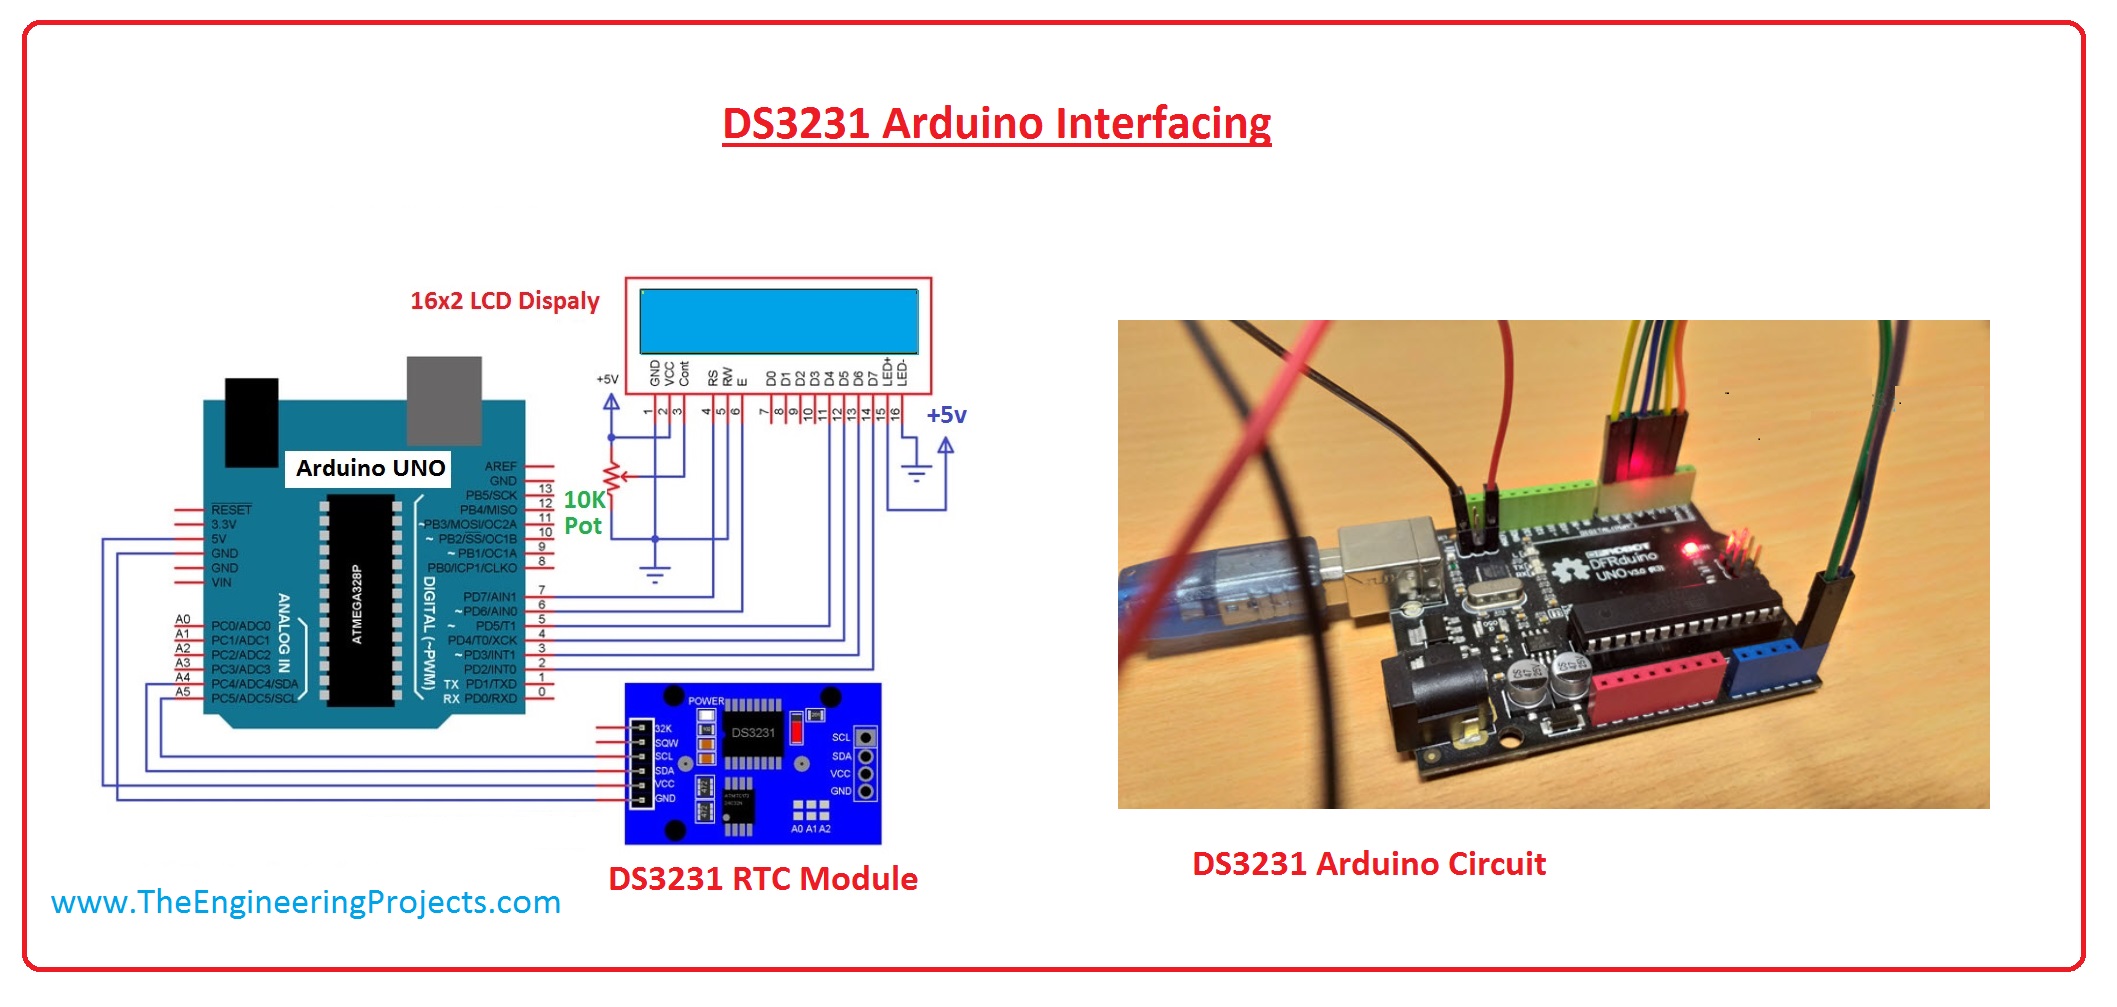 DS3231 Introduction, DS3231 Pinout, DS3231 Features, DS3231 working, DS3231 Applications, DS3231 Arduino interfacing, DS3231